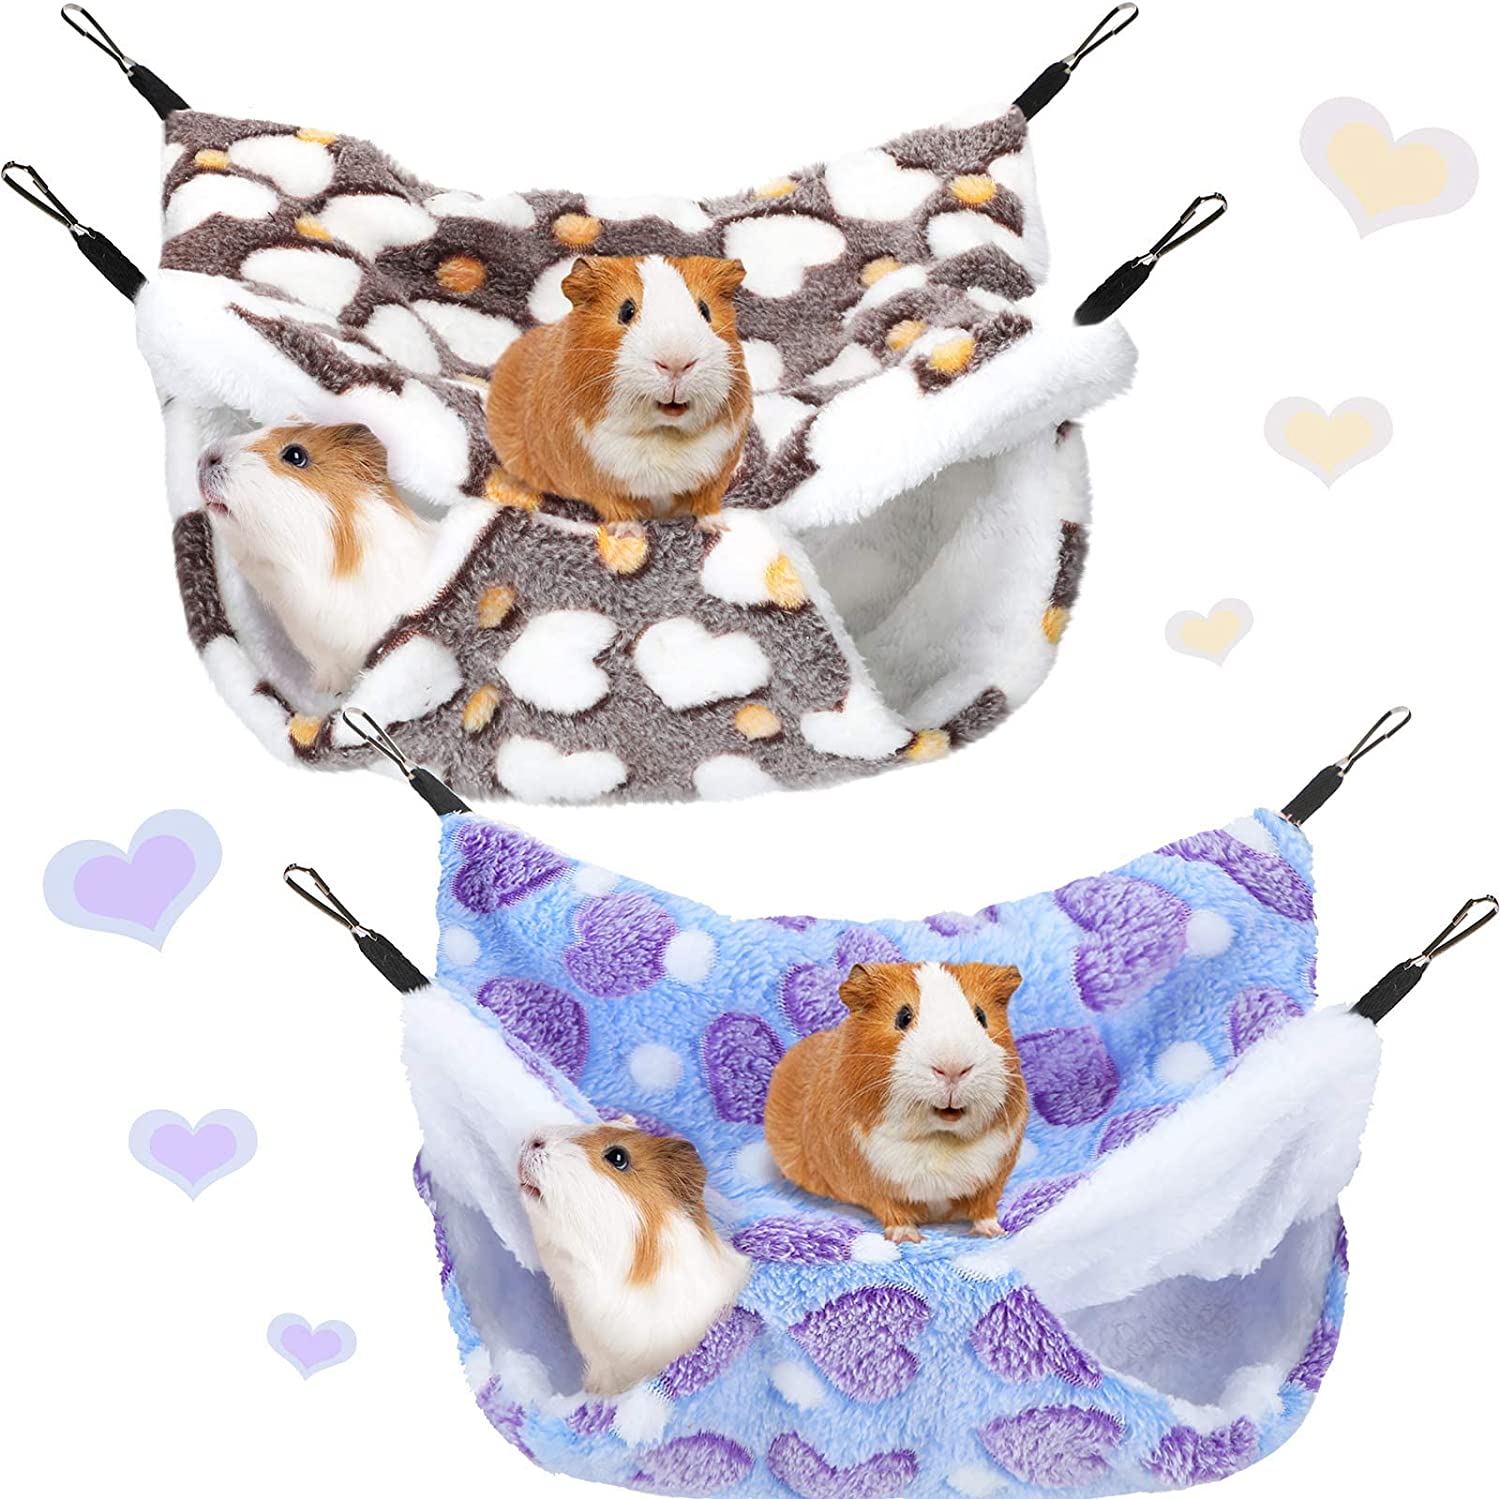  gifts-for-guinea-pigs-hammmock